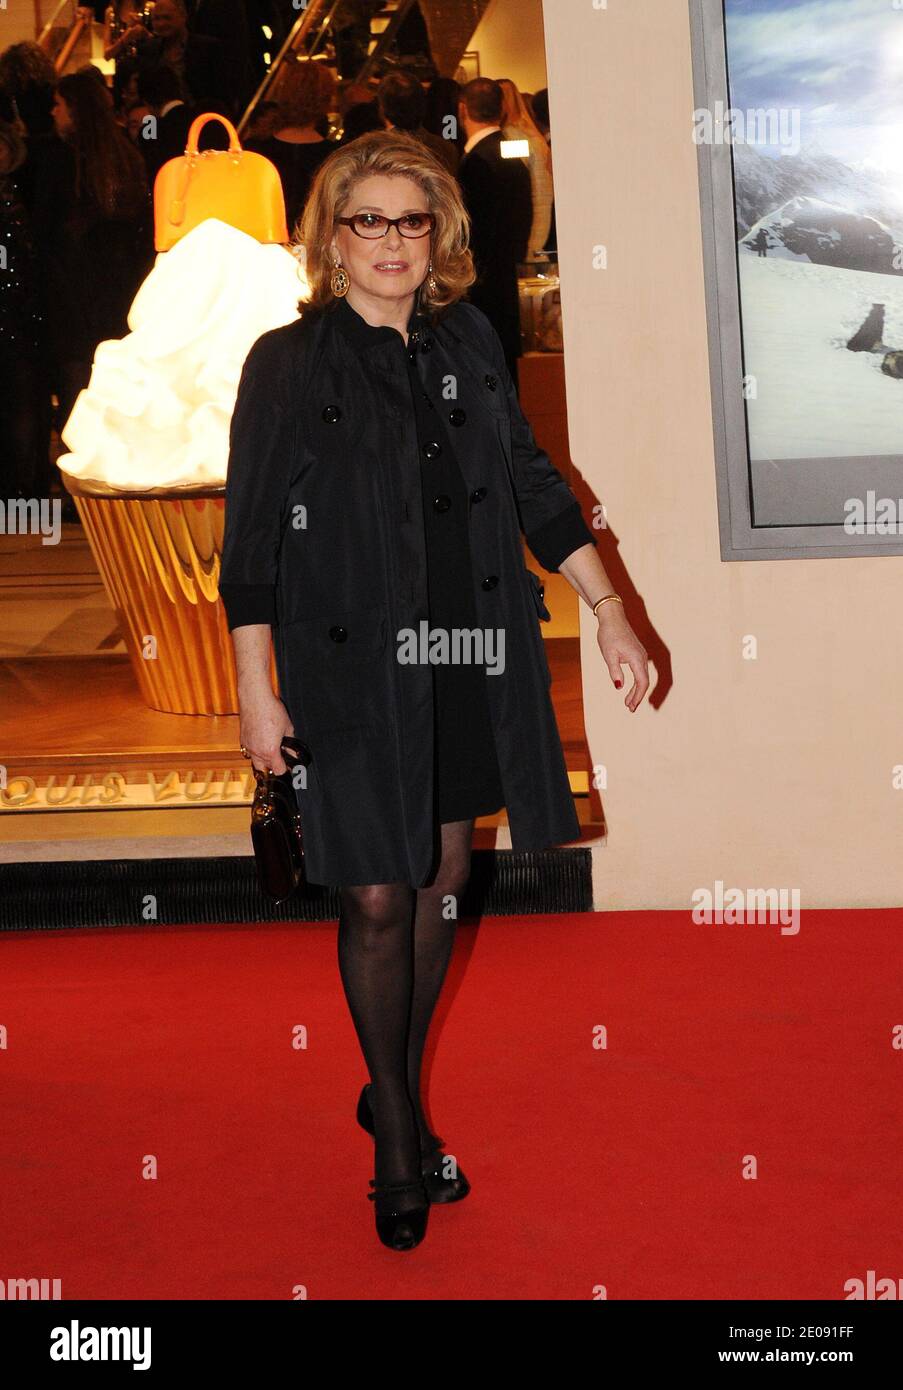 Sovesal forberede Stien Actress Catherine Deneuve arriving for the opening of the first Louis  Vuitton Maison in Rome, Italy on January 27, 2012. The store is called  'L'Etoile' after the name of the historic cinema